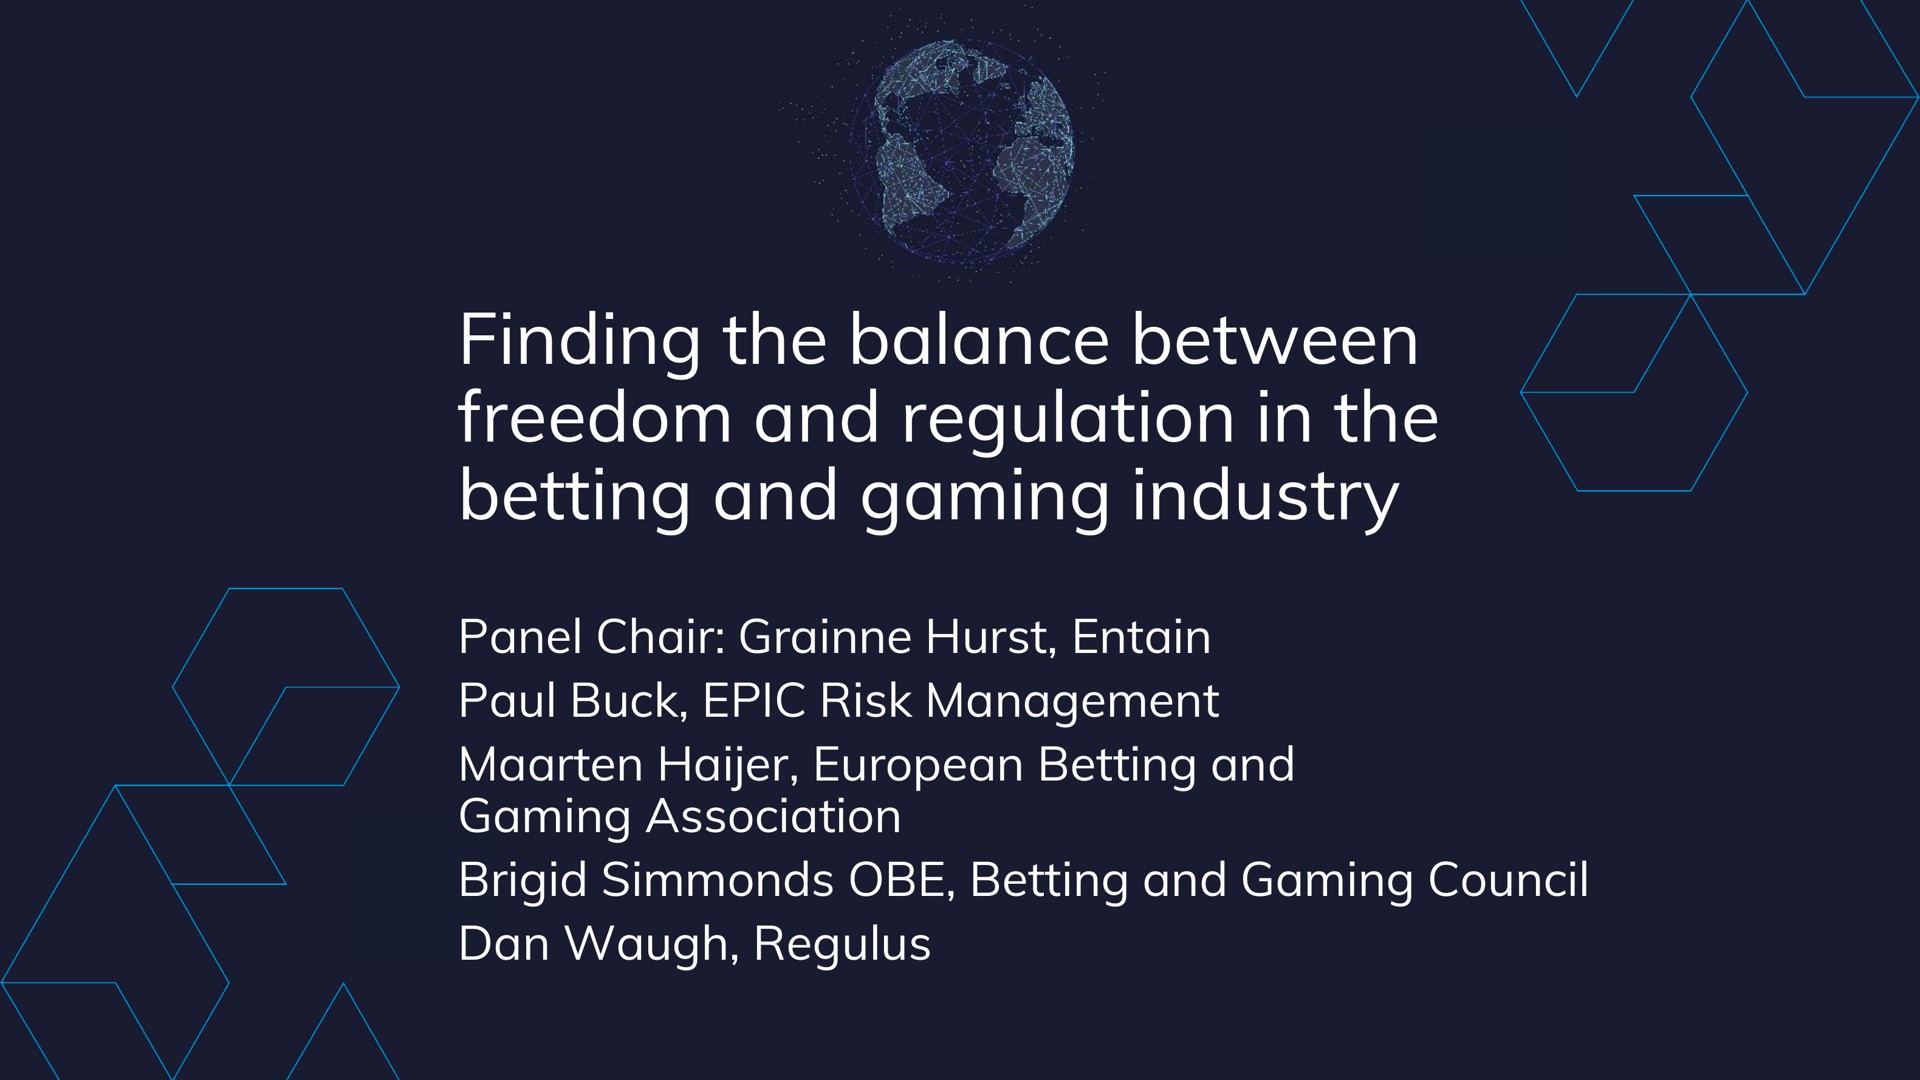 finding the balance between freedom and regulation in the betting and gaming industry | Entain Group